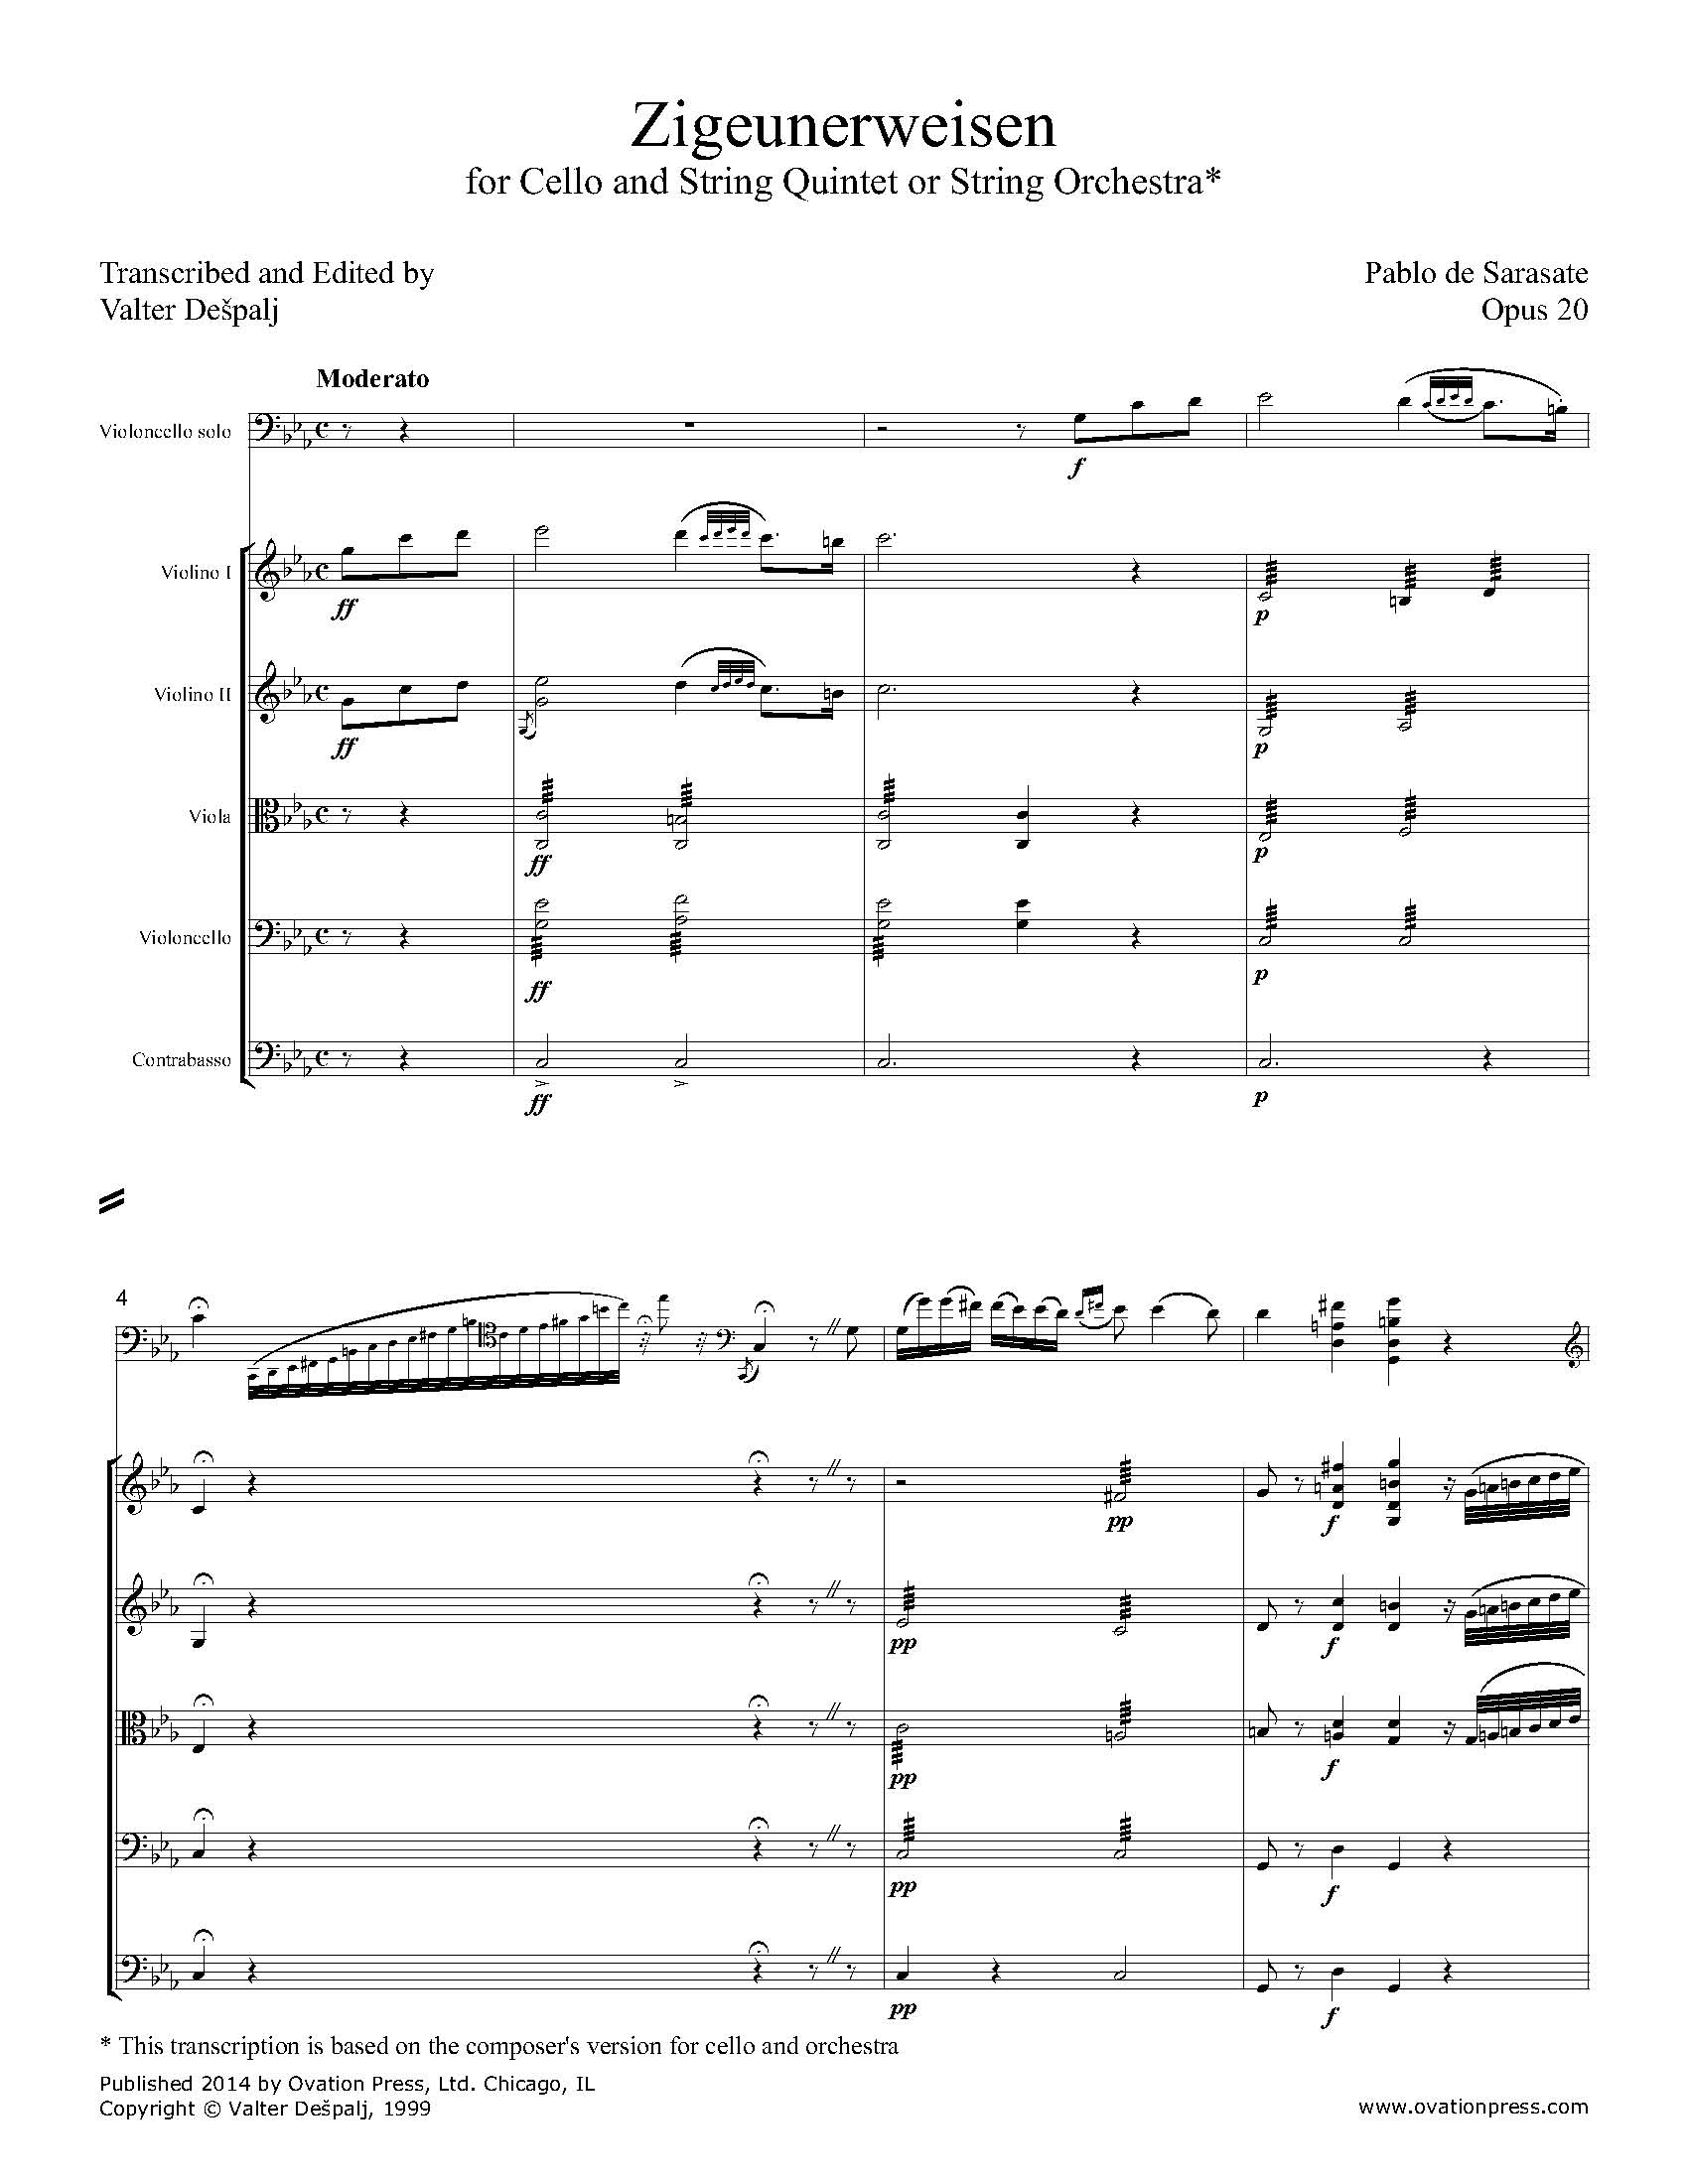 Zigeunerweisen Transcribed for Cello and String Quintet or String Orchestra